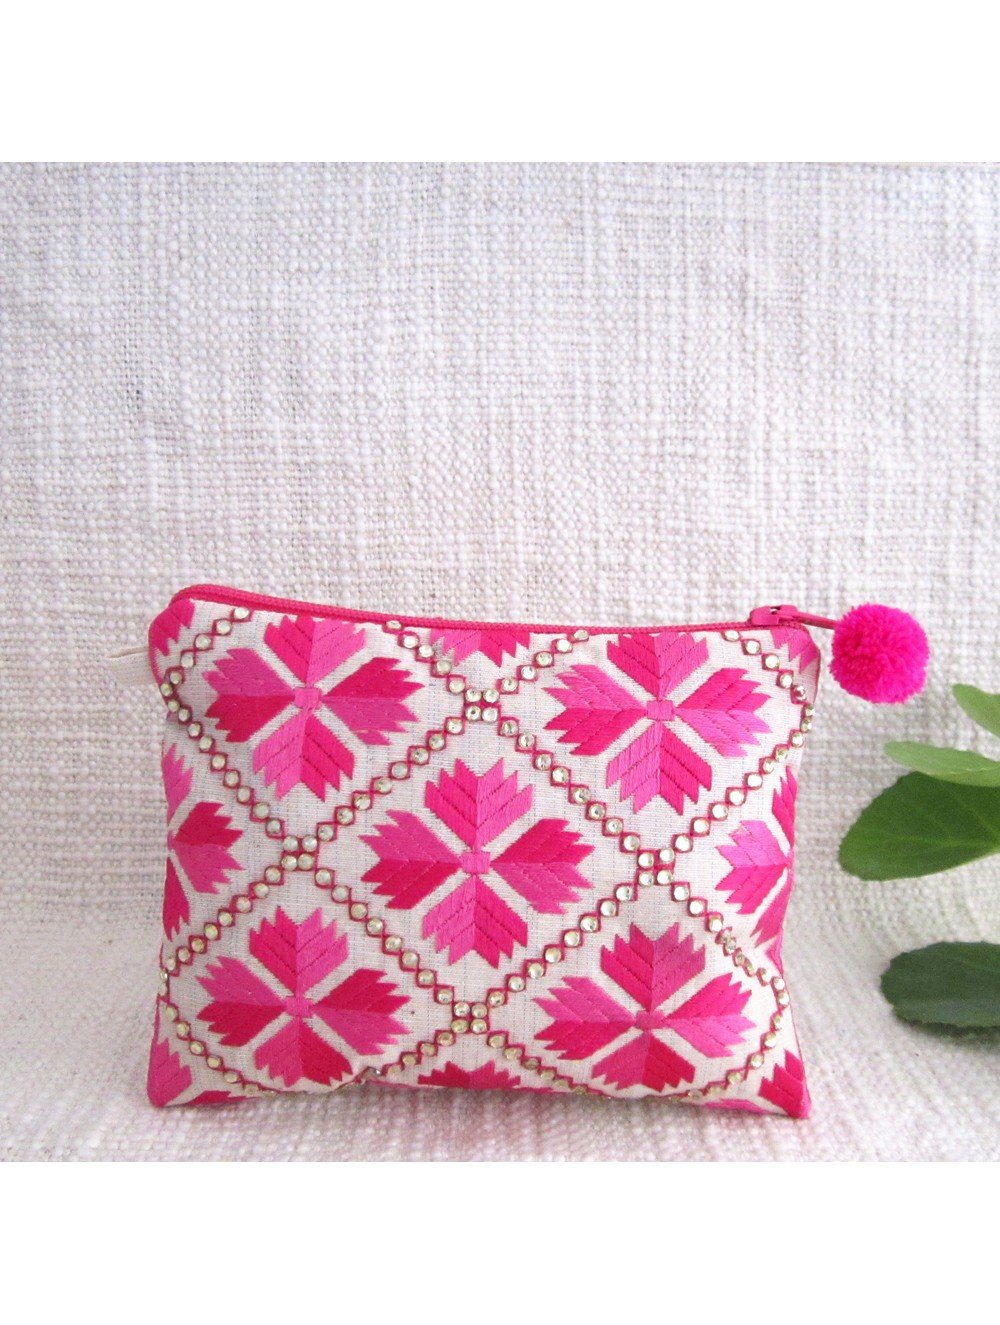 Load image into Gallery viewer, 2 toned Embellished Pink Coin Pouch